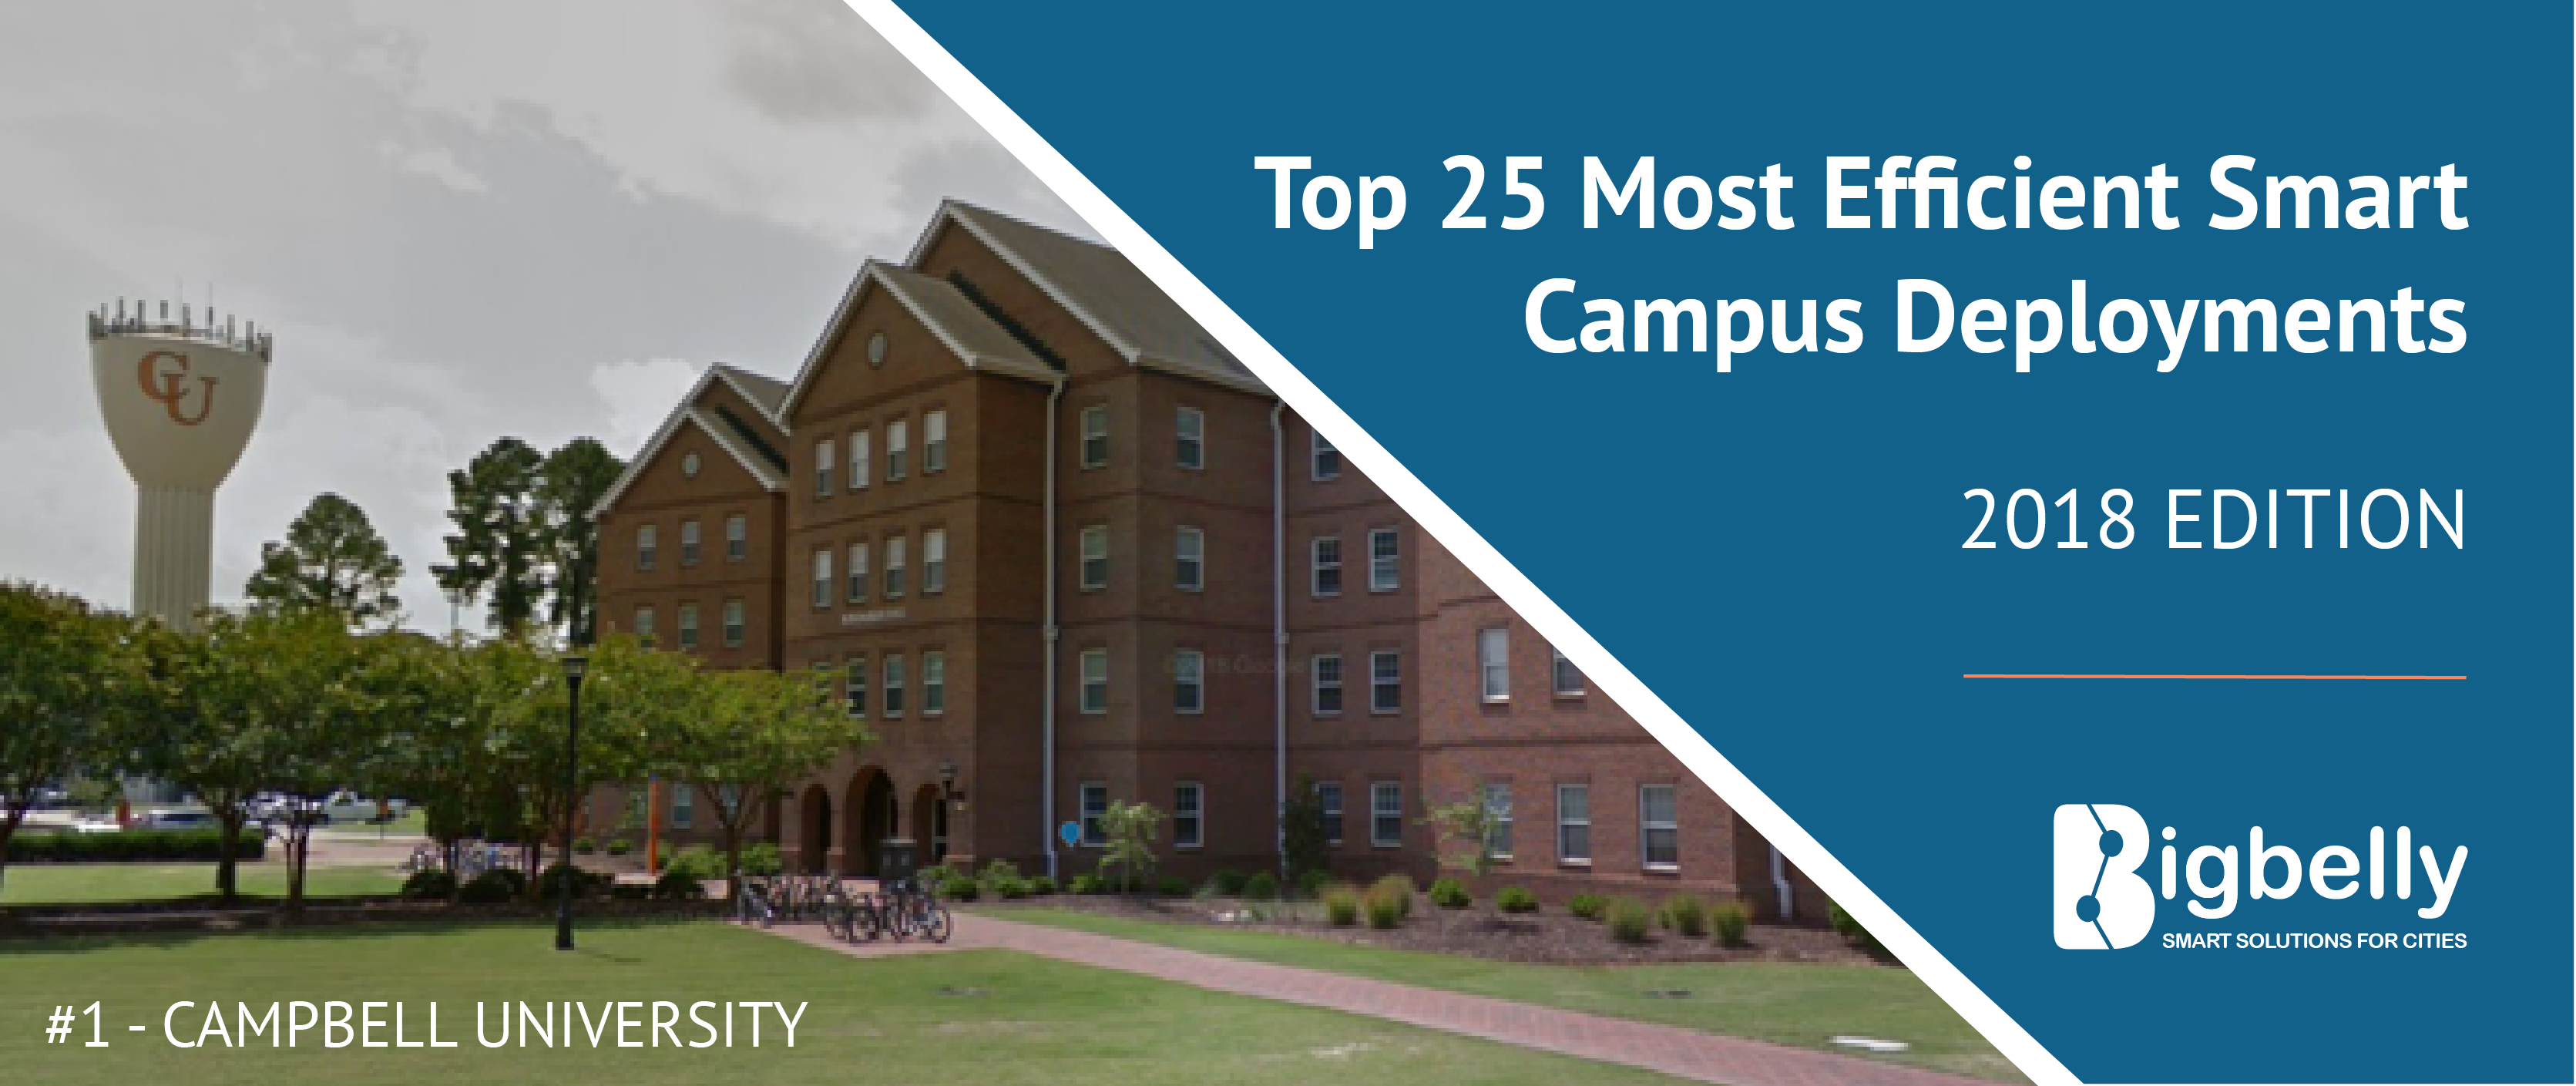 Top 25 Most Efficient Smart Campus Deployments - Bigbelly's 2018 in Review